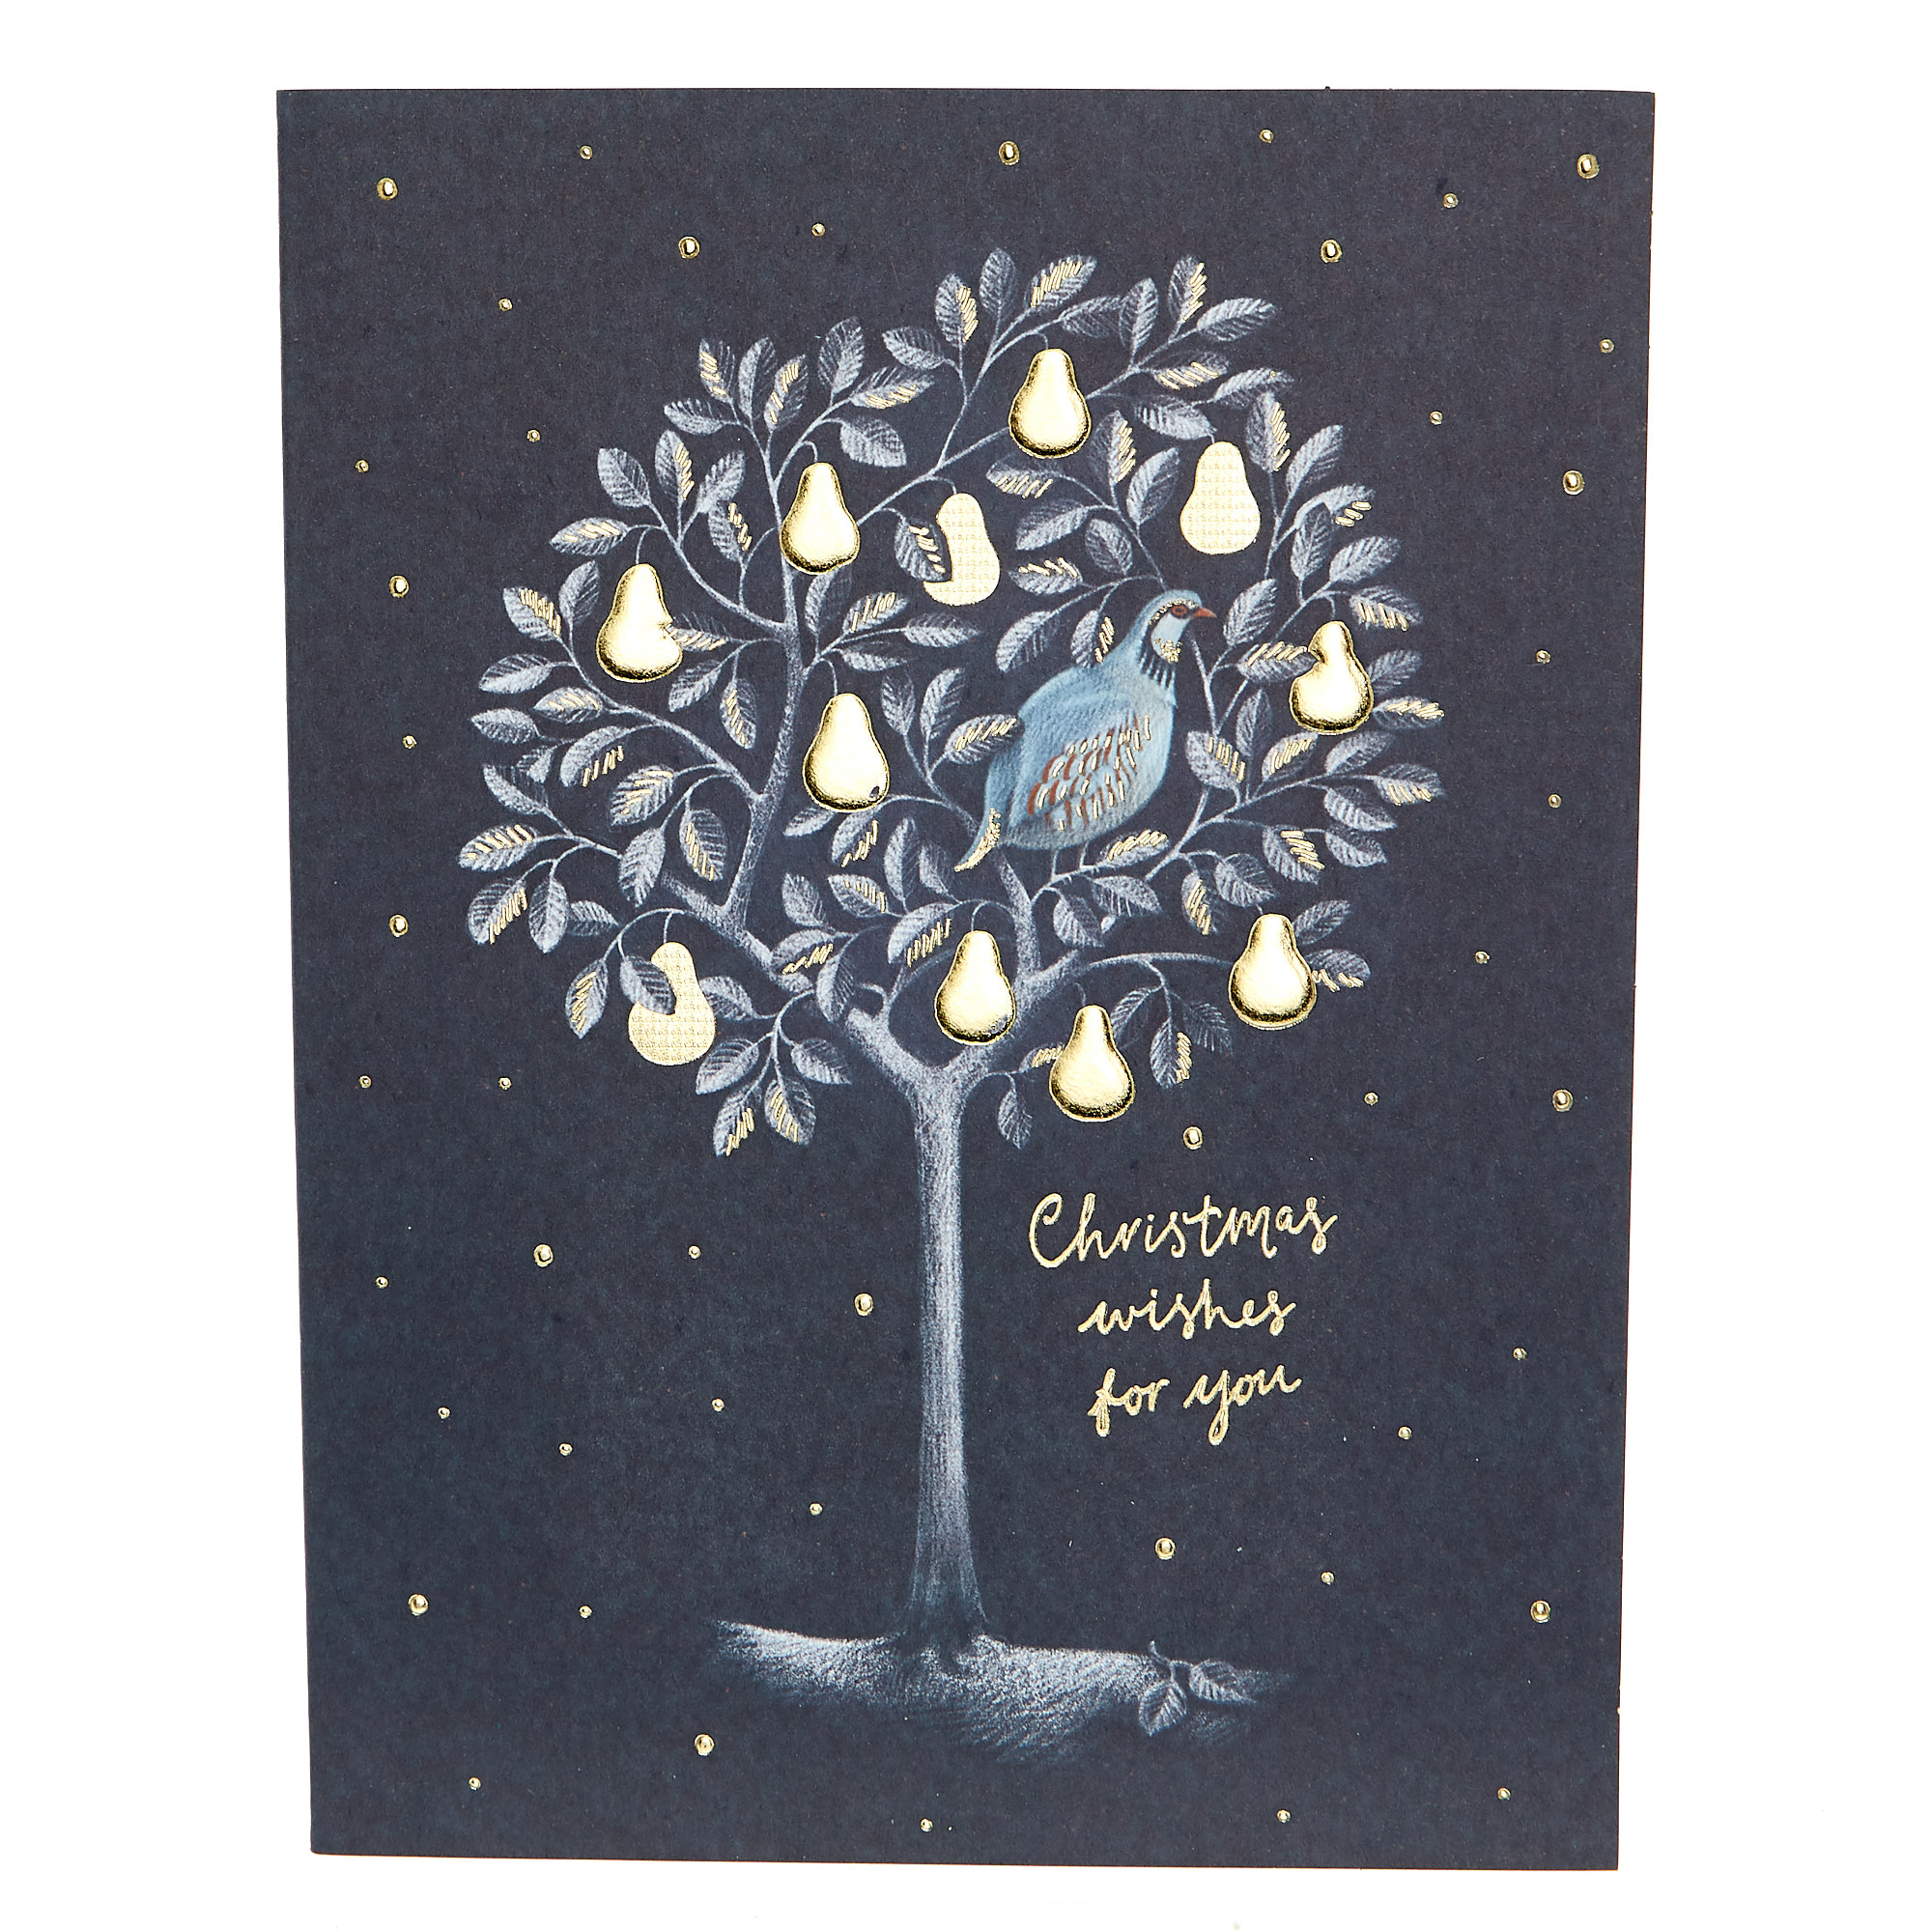 Buy Box of 12 Deluxe Pear Tree Charity Christmas Cards - 2 Designs for GBP 2.99 | Card Factory UK